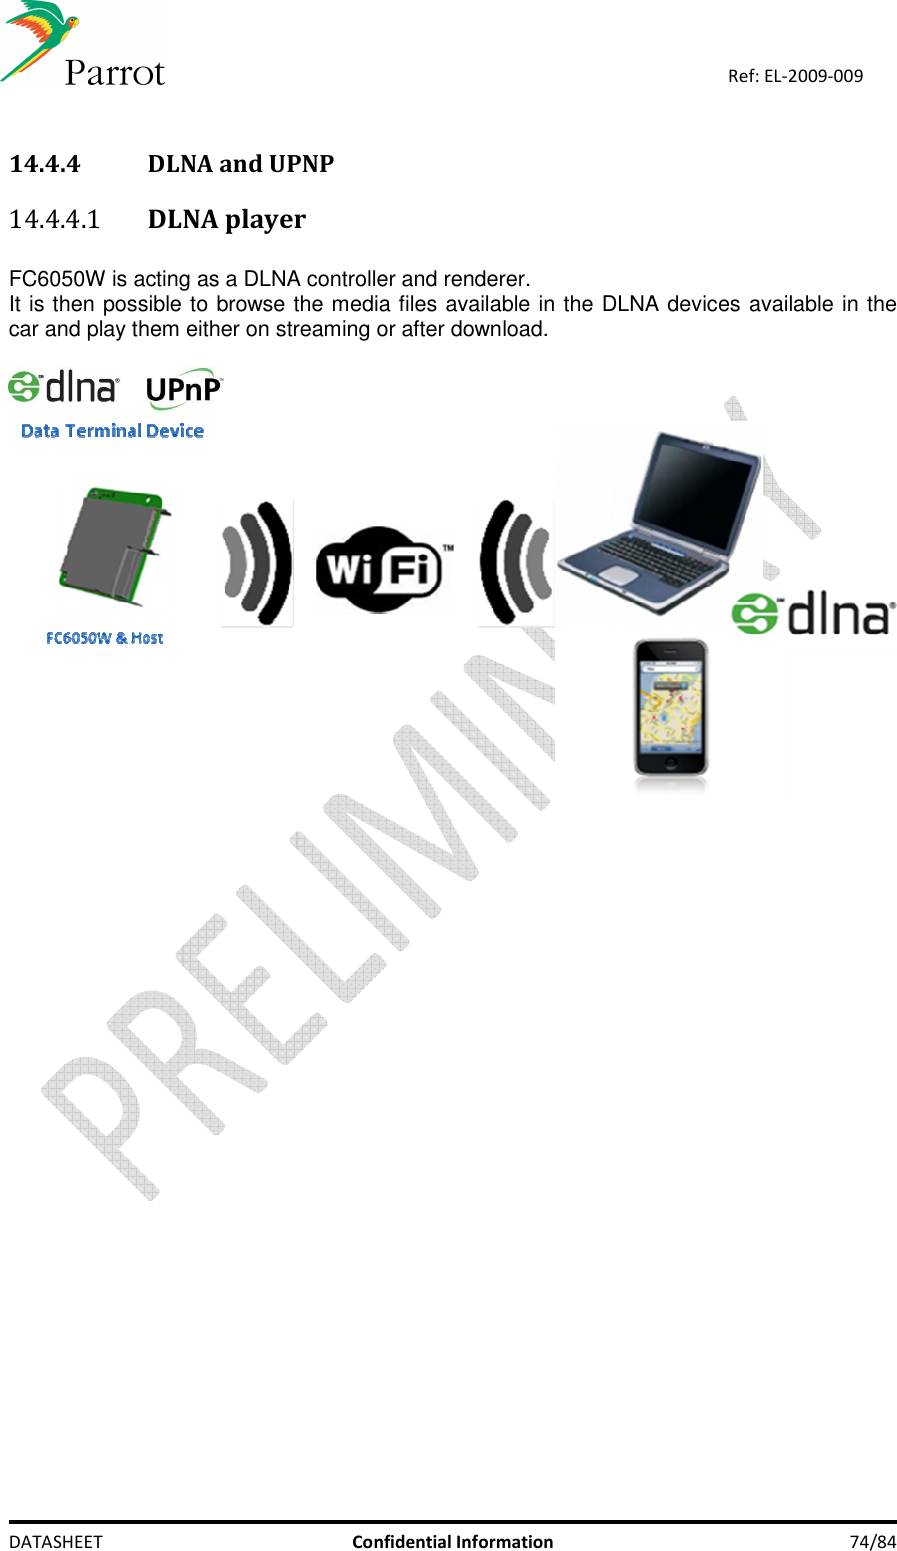    DATASHEET  Confidential Information  74/84 Ref: EL-2009-009  14.4.4 DLNA and UPNP   14.4.4.1 DLNA player    FC6050W is acting as a DLNA controller and renderer. It is then possible to browse the media files available in the DLNA devices available in the car and play them either on streaming or after download.         